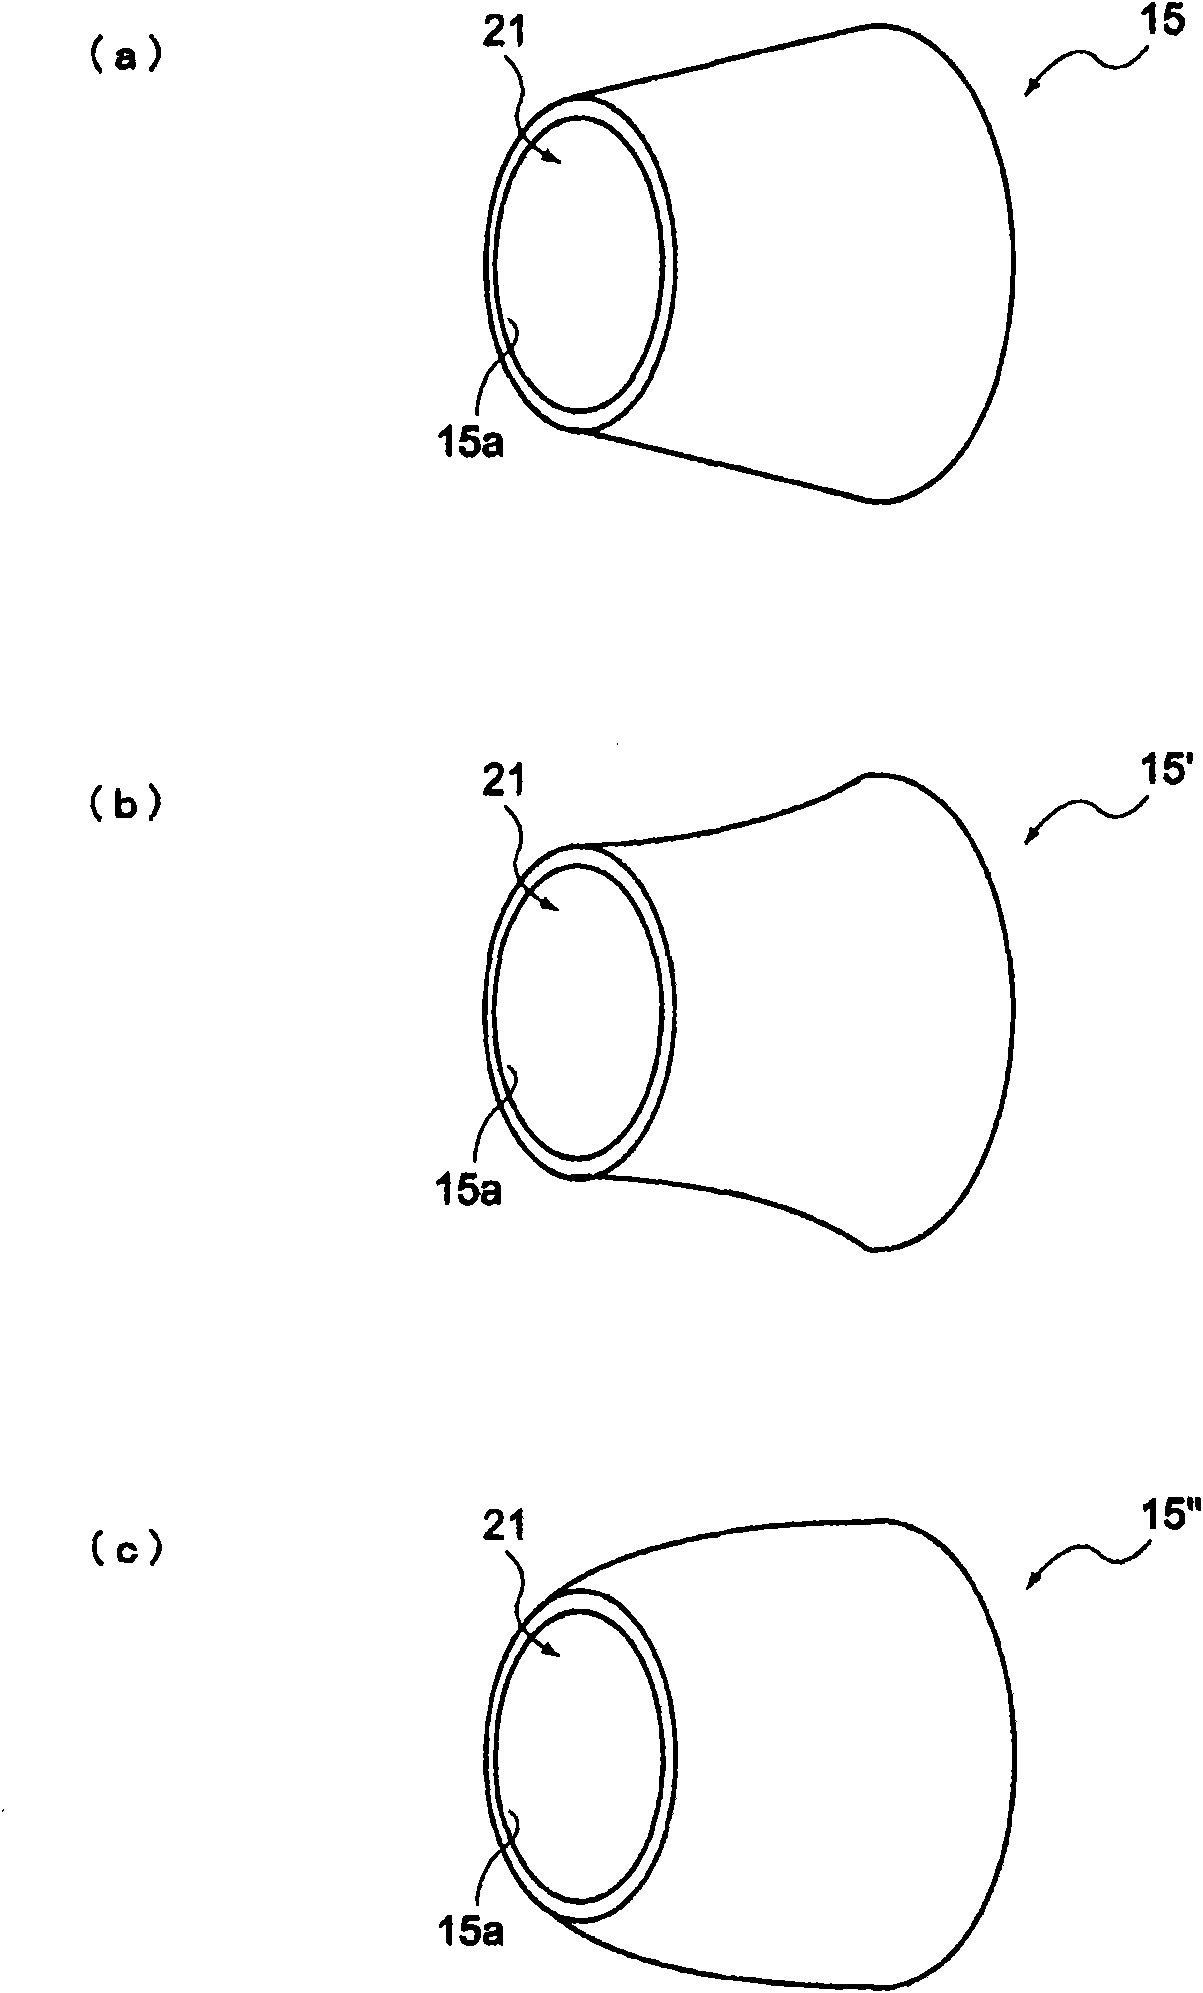 Exhaust gas purification apparatus for internal combustion engine